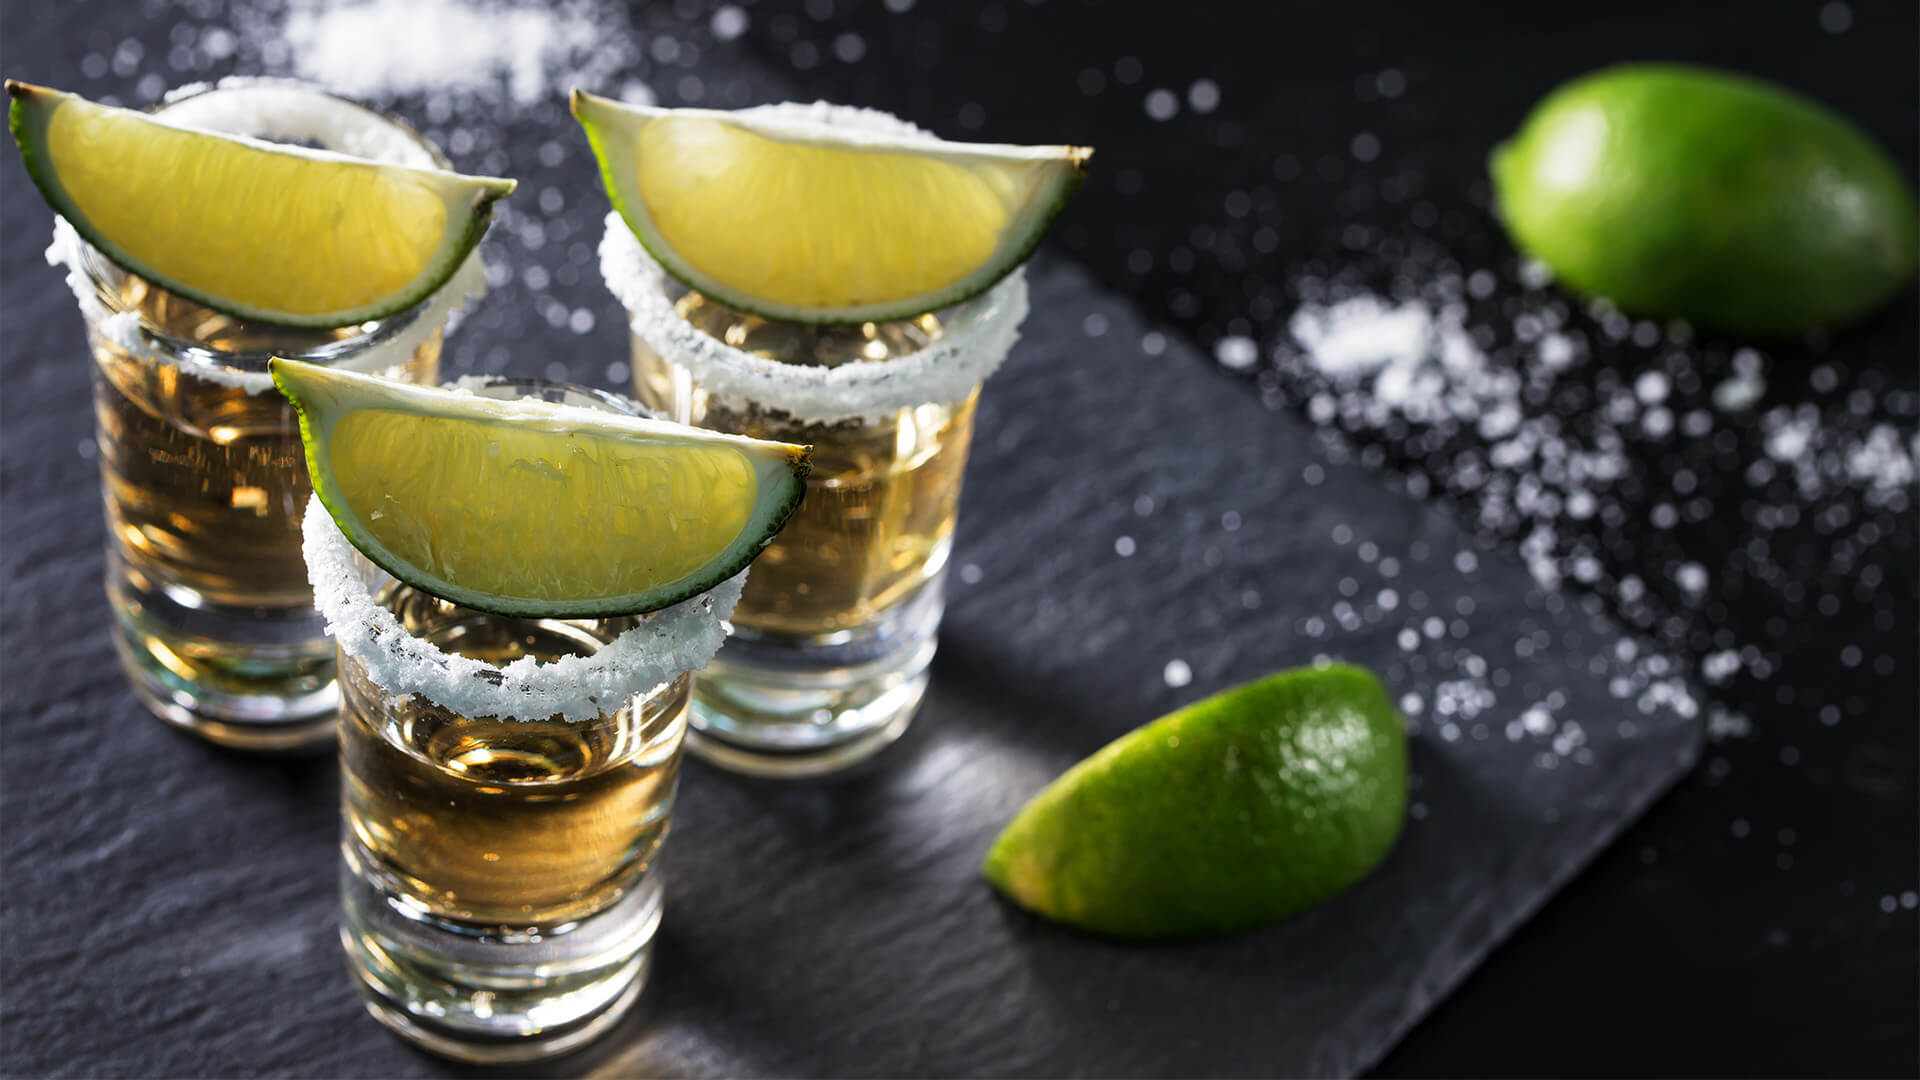 Shot glasses of tequila with lime wedges and salt on the rim